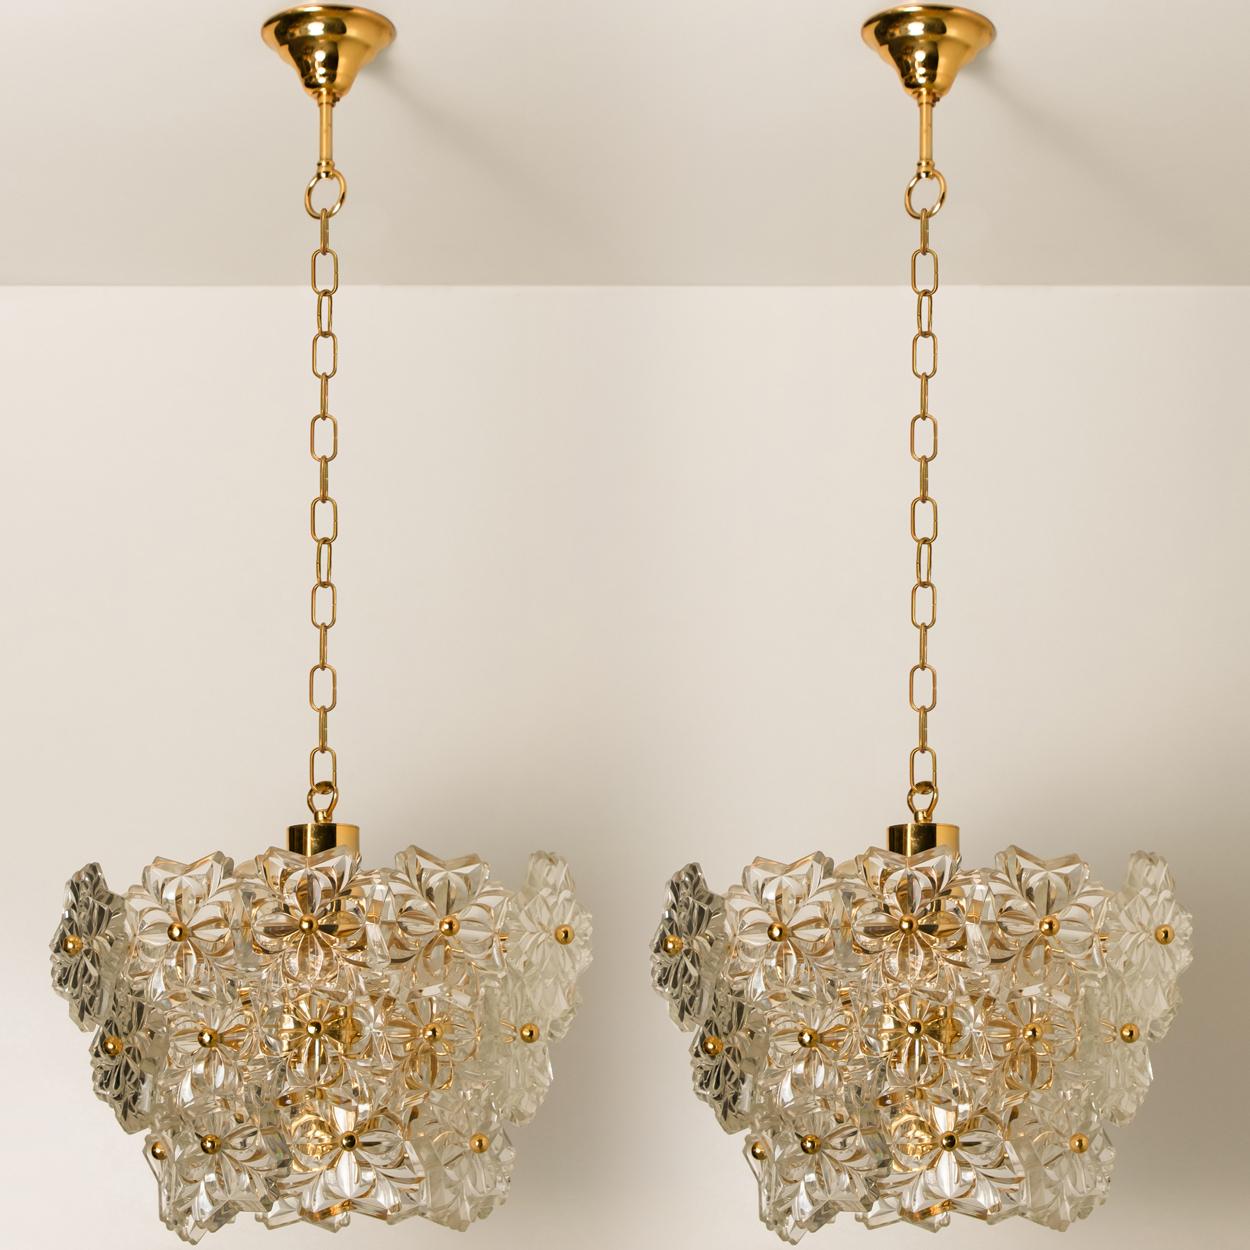 1 of the 2 Glass and Brass Floral Three Tiers Light Fixtures, 1970s For Sale 8